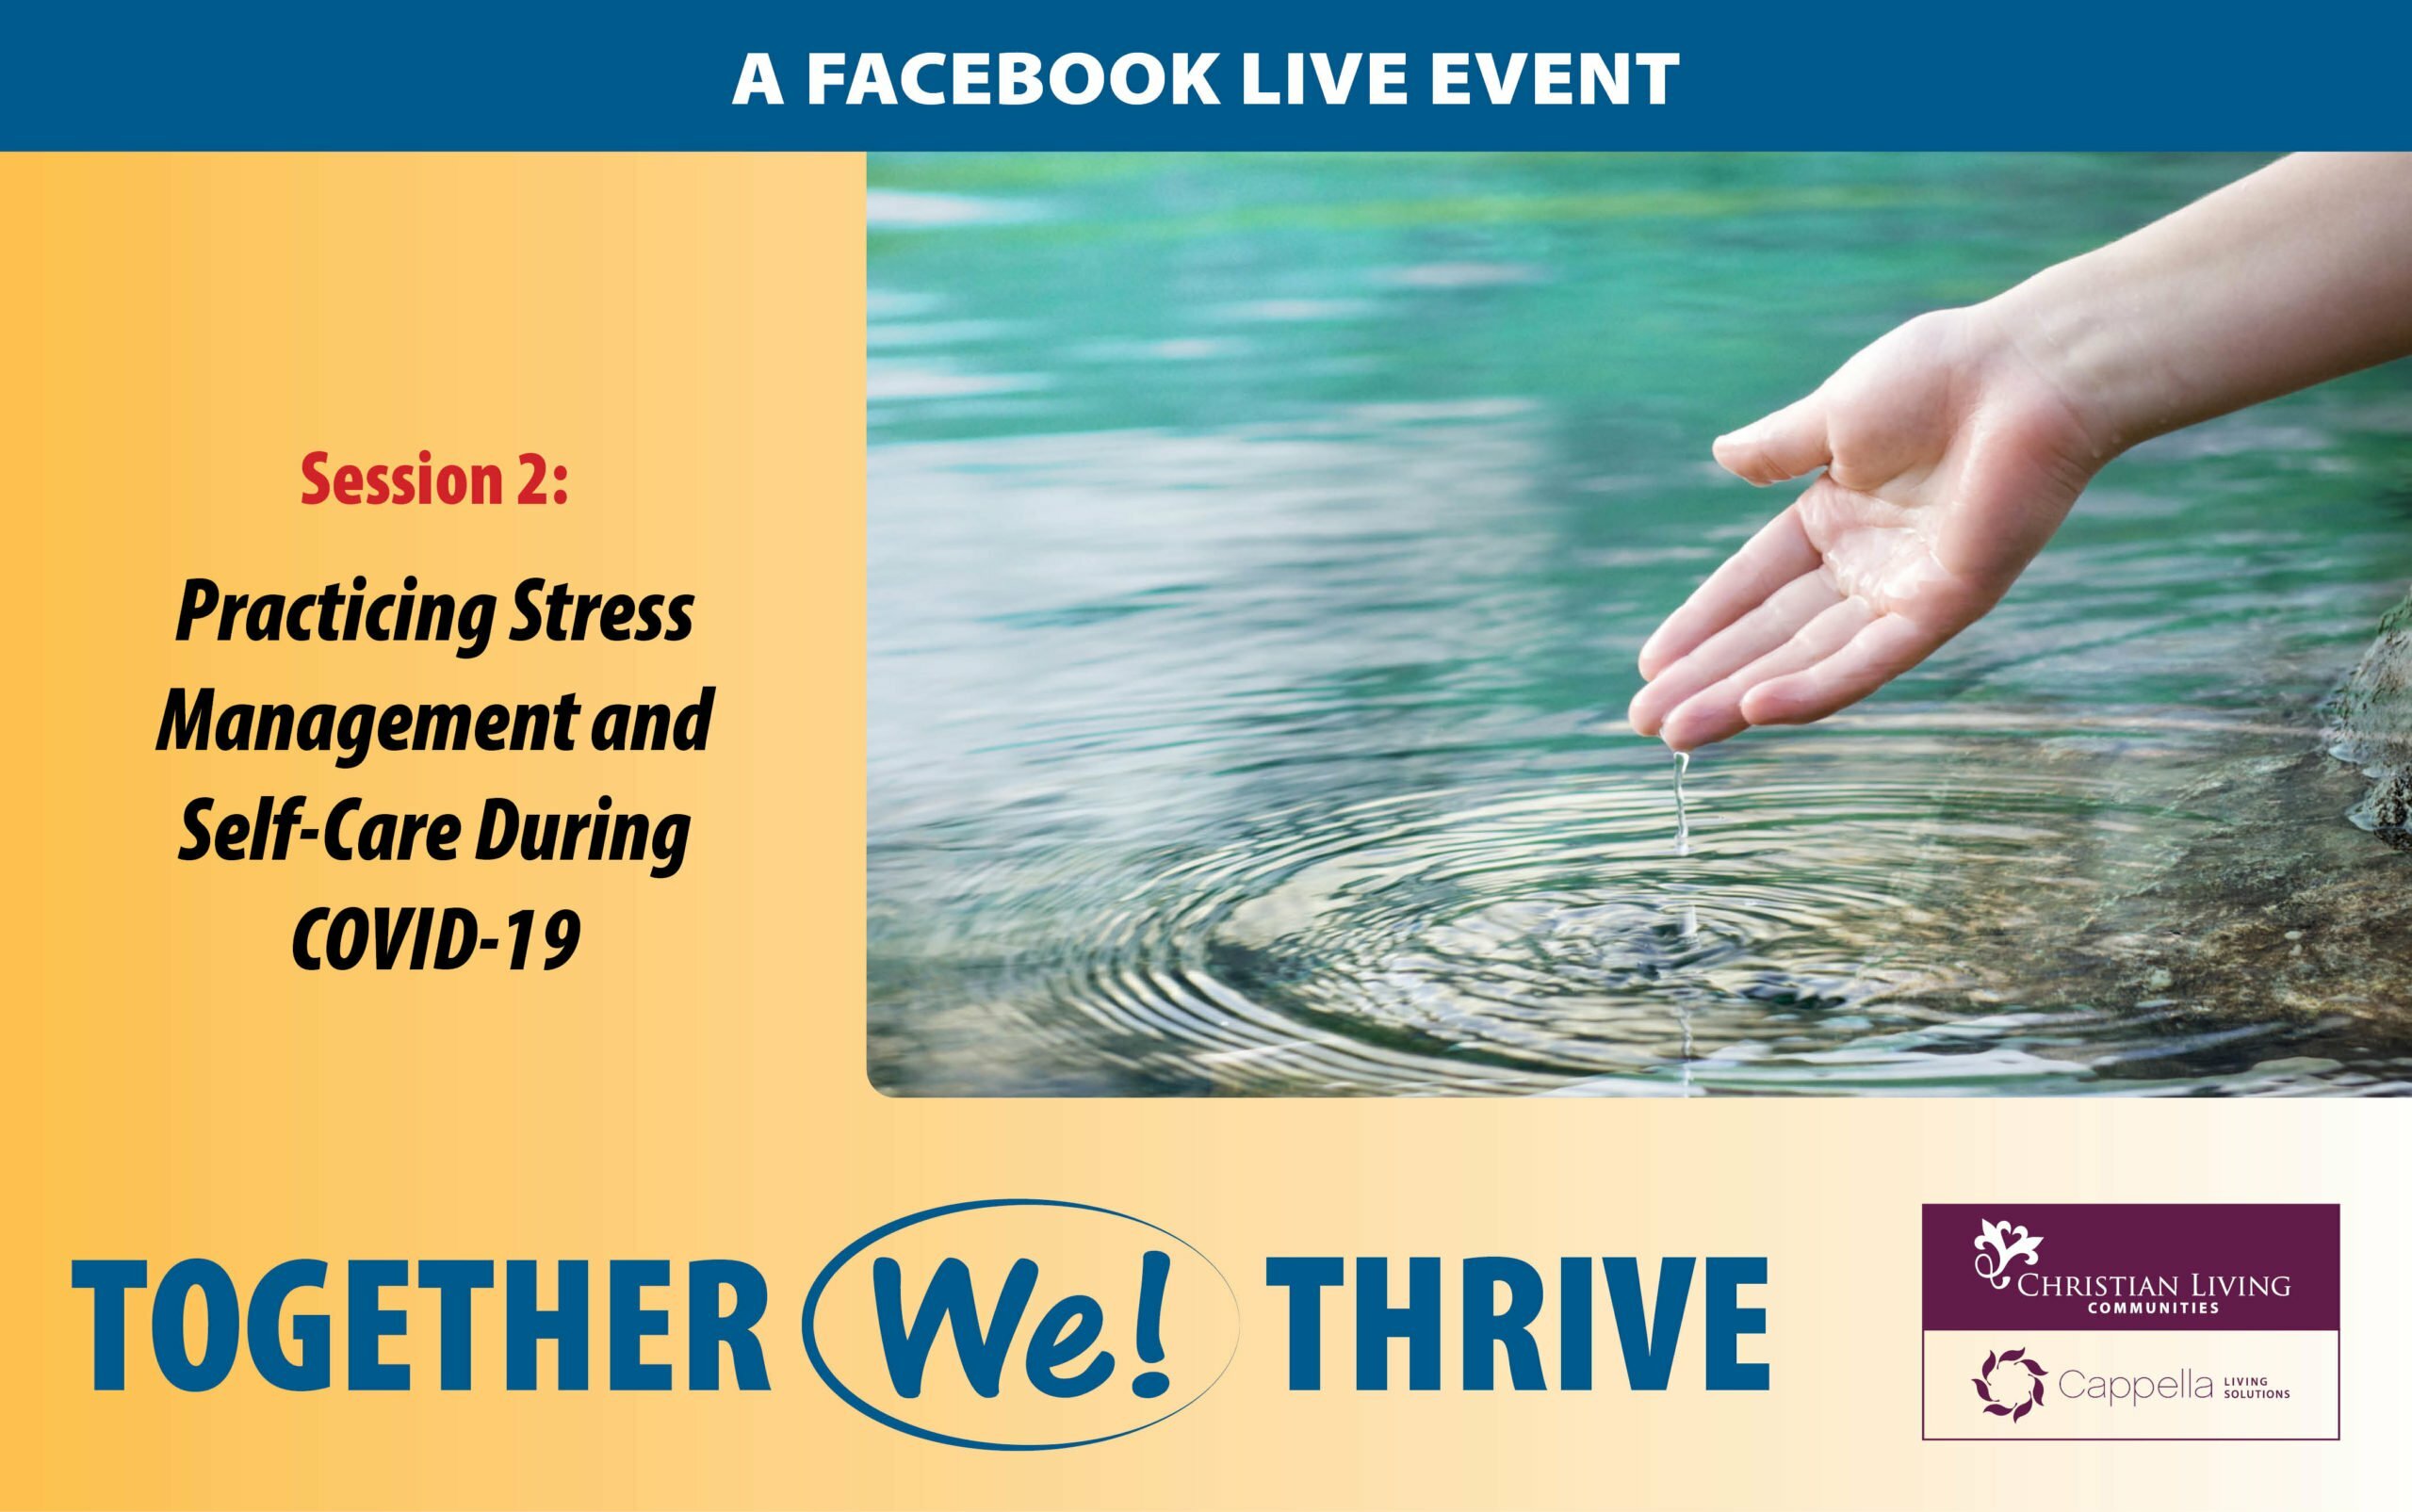 Together We! Thrive A Facebook Live Event - Practicing Stress Management and Self-Care during COVID-19.